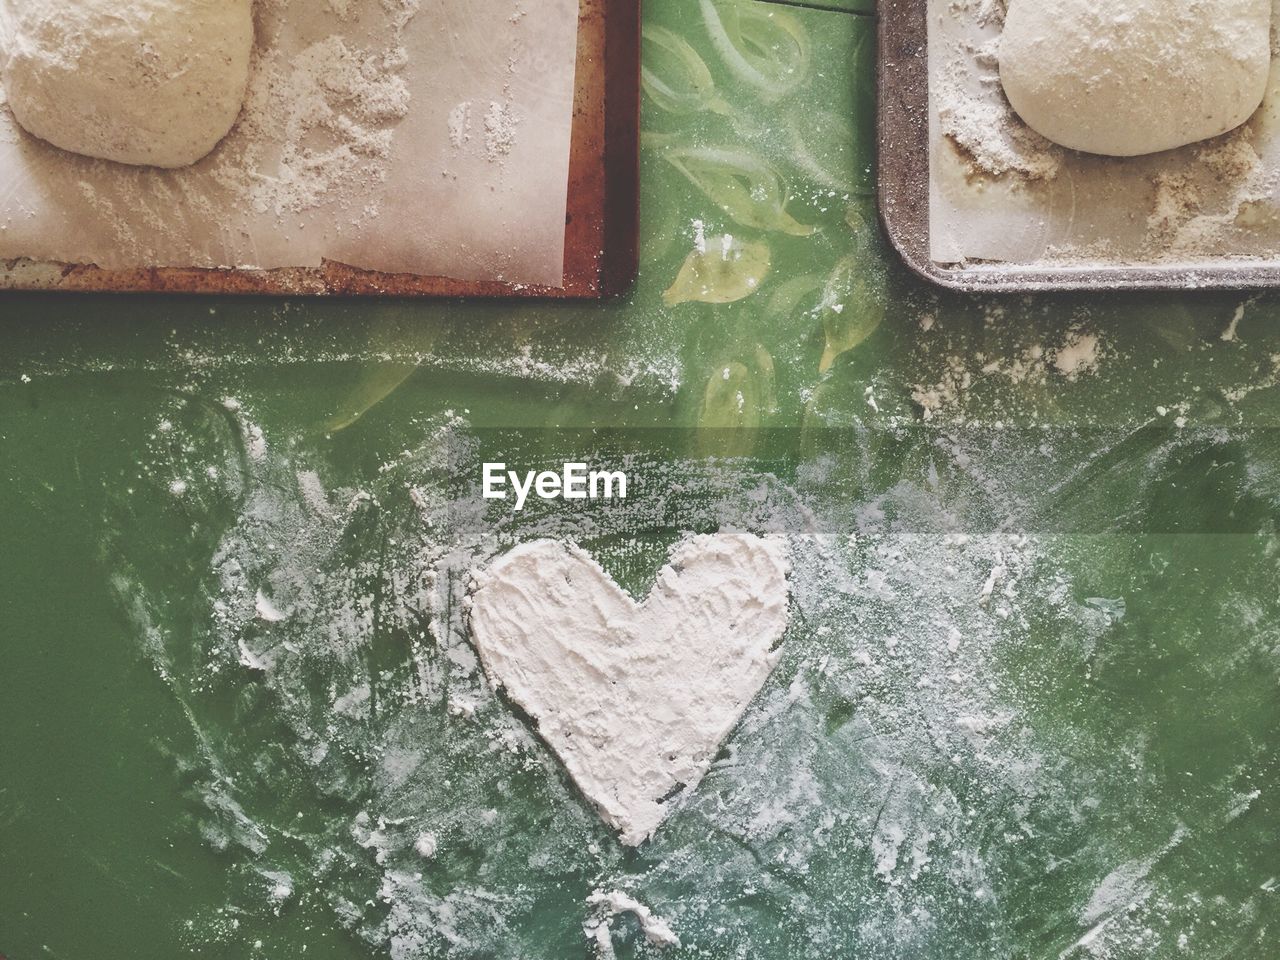 Directly above shot of heart shape bread dough